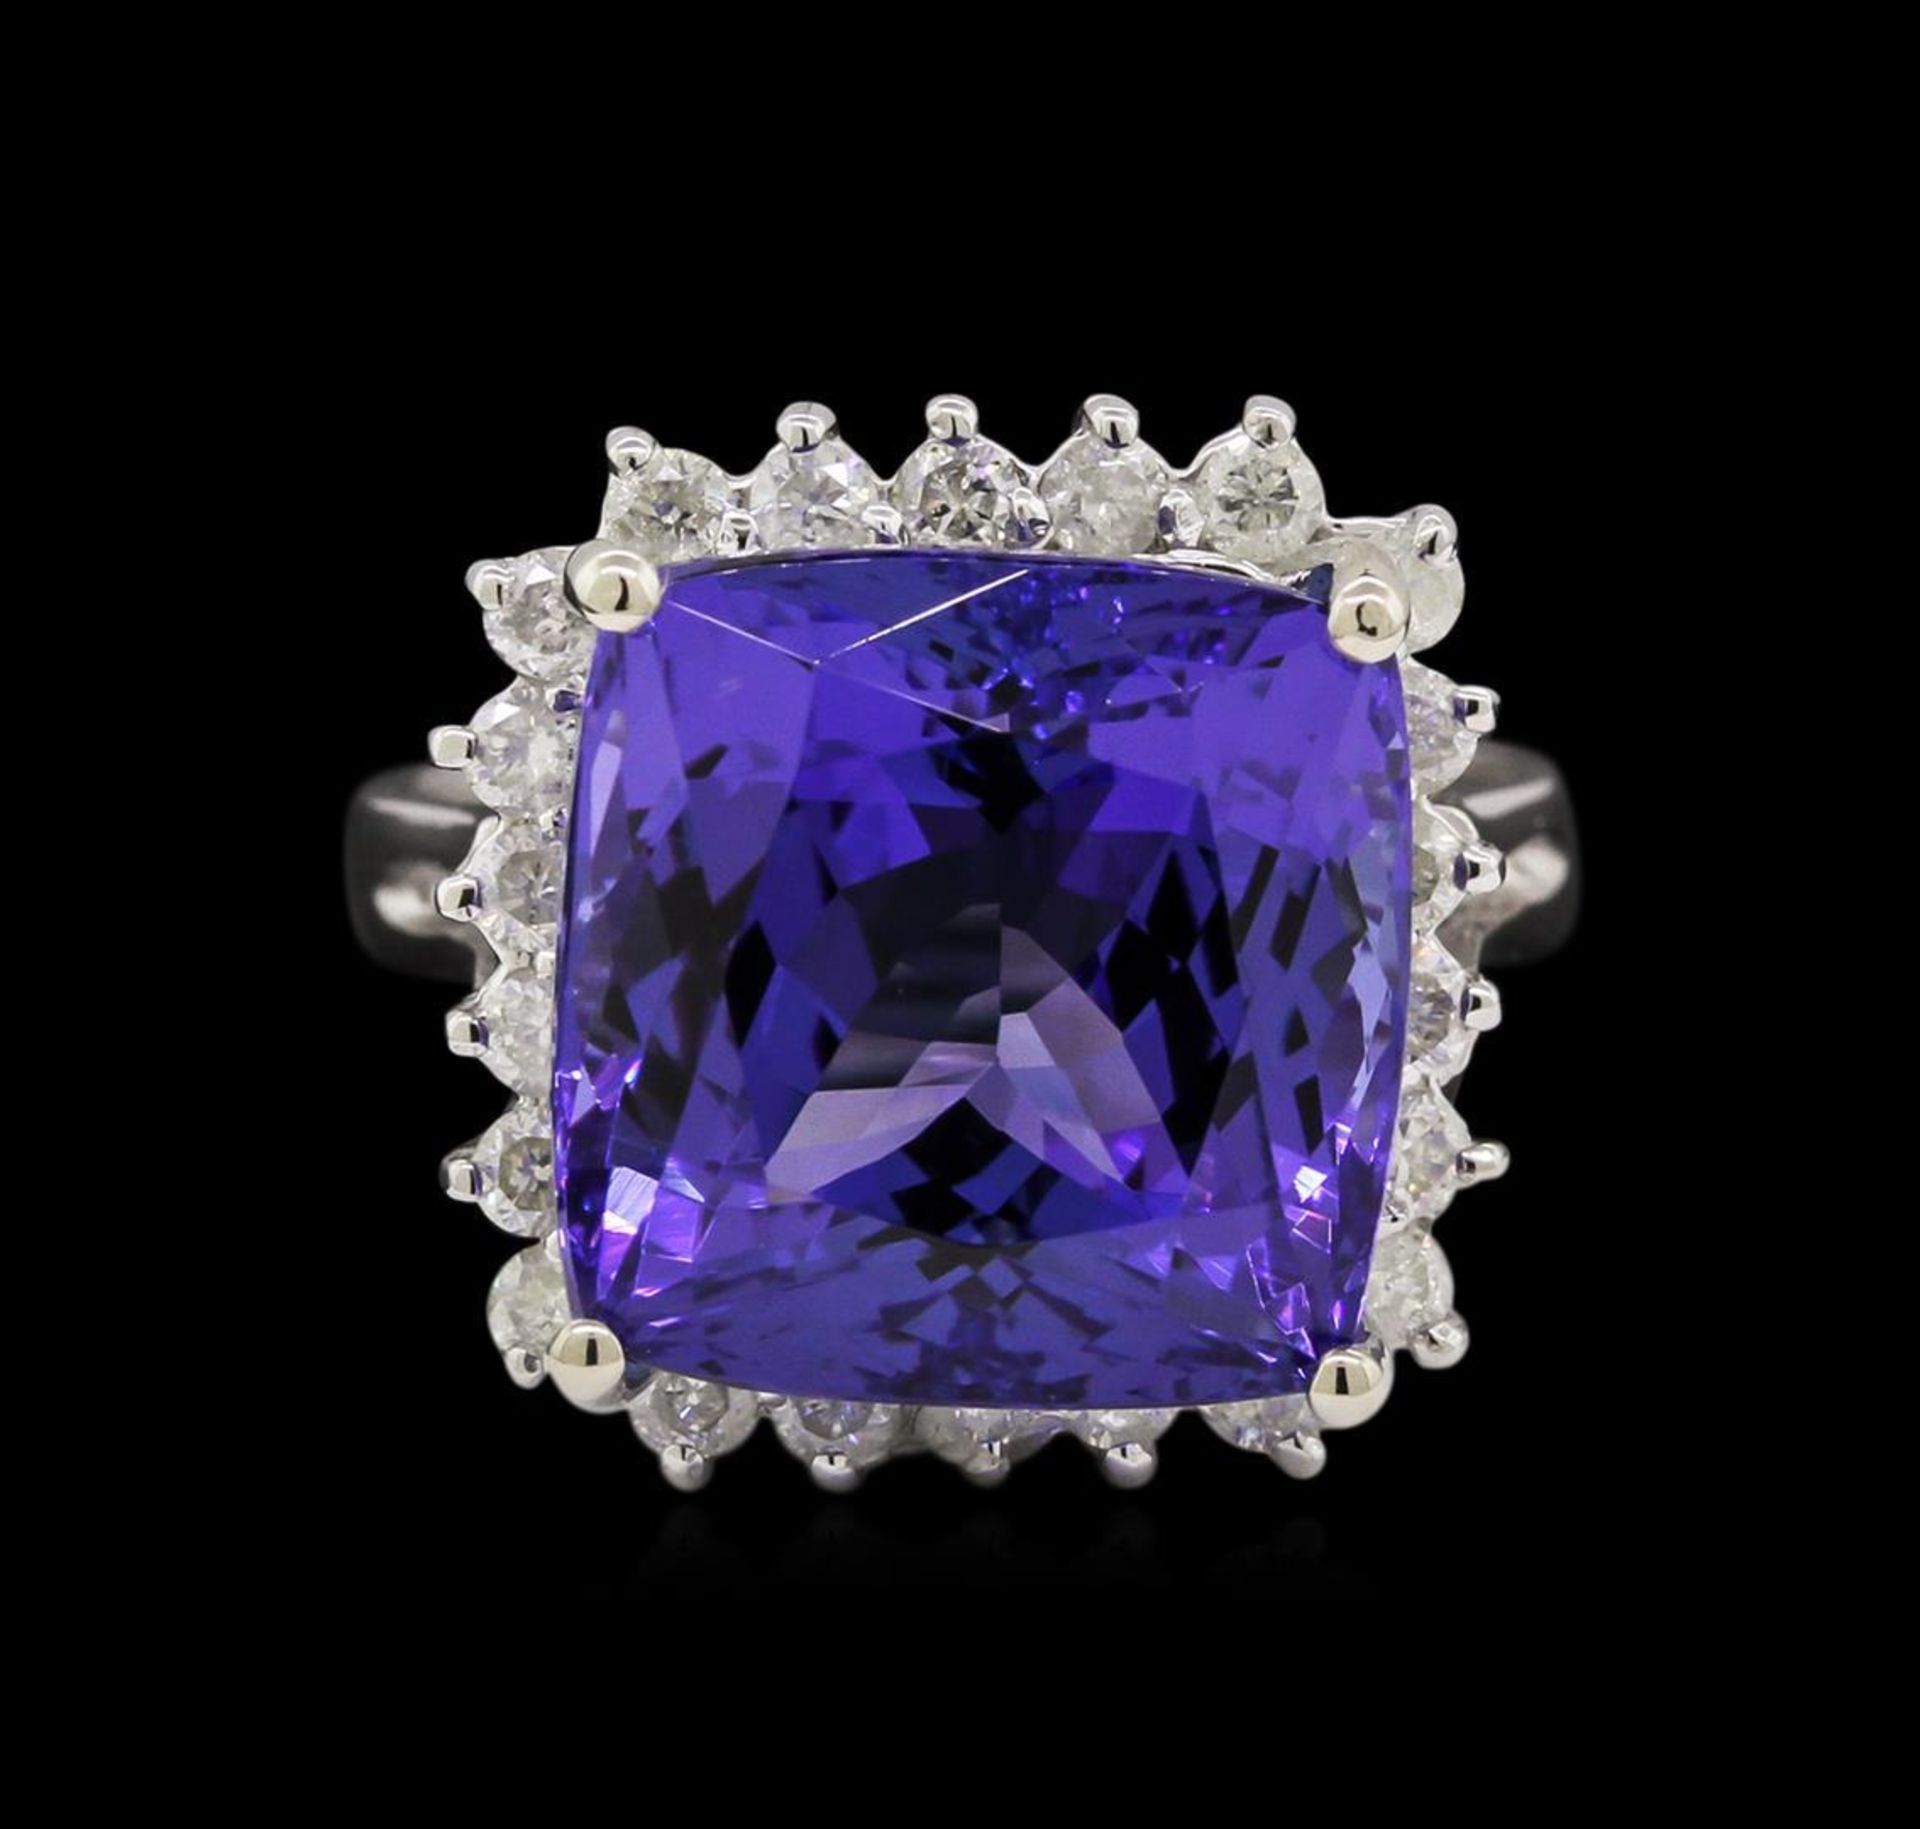 14KT White Gold 12.95 ctw GIA Certified Tanzanite and Diamond Ring - Image 2 of 5